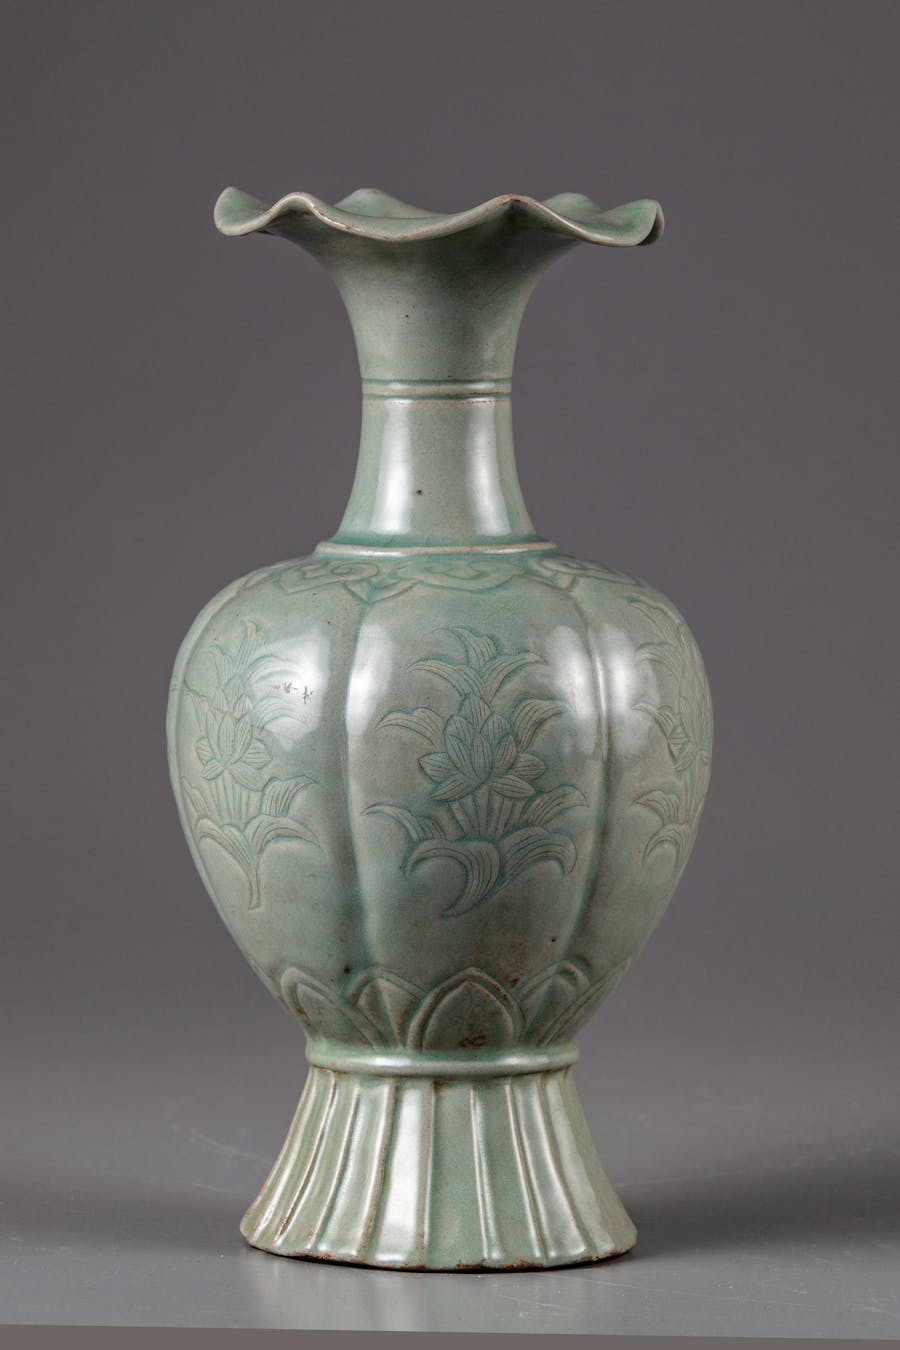 A Korean celadon glazed vase, melon-shaped,  featuring the eight-petal flower mouth and incised parallel lines on the neck. The lobed sides are decorated with flower sprays, below a band of ruyi heads and plantain leaves to the base. All covered with a grey-green glaze. Photo © Oriental Art Auctions